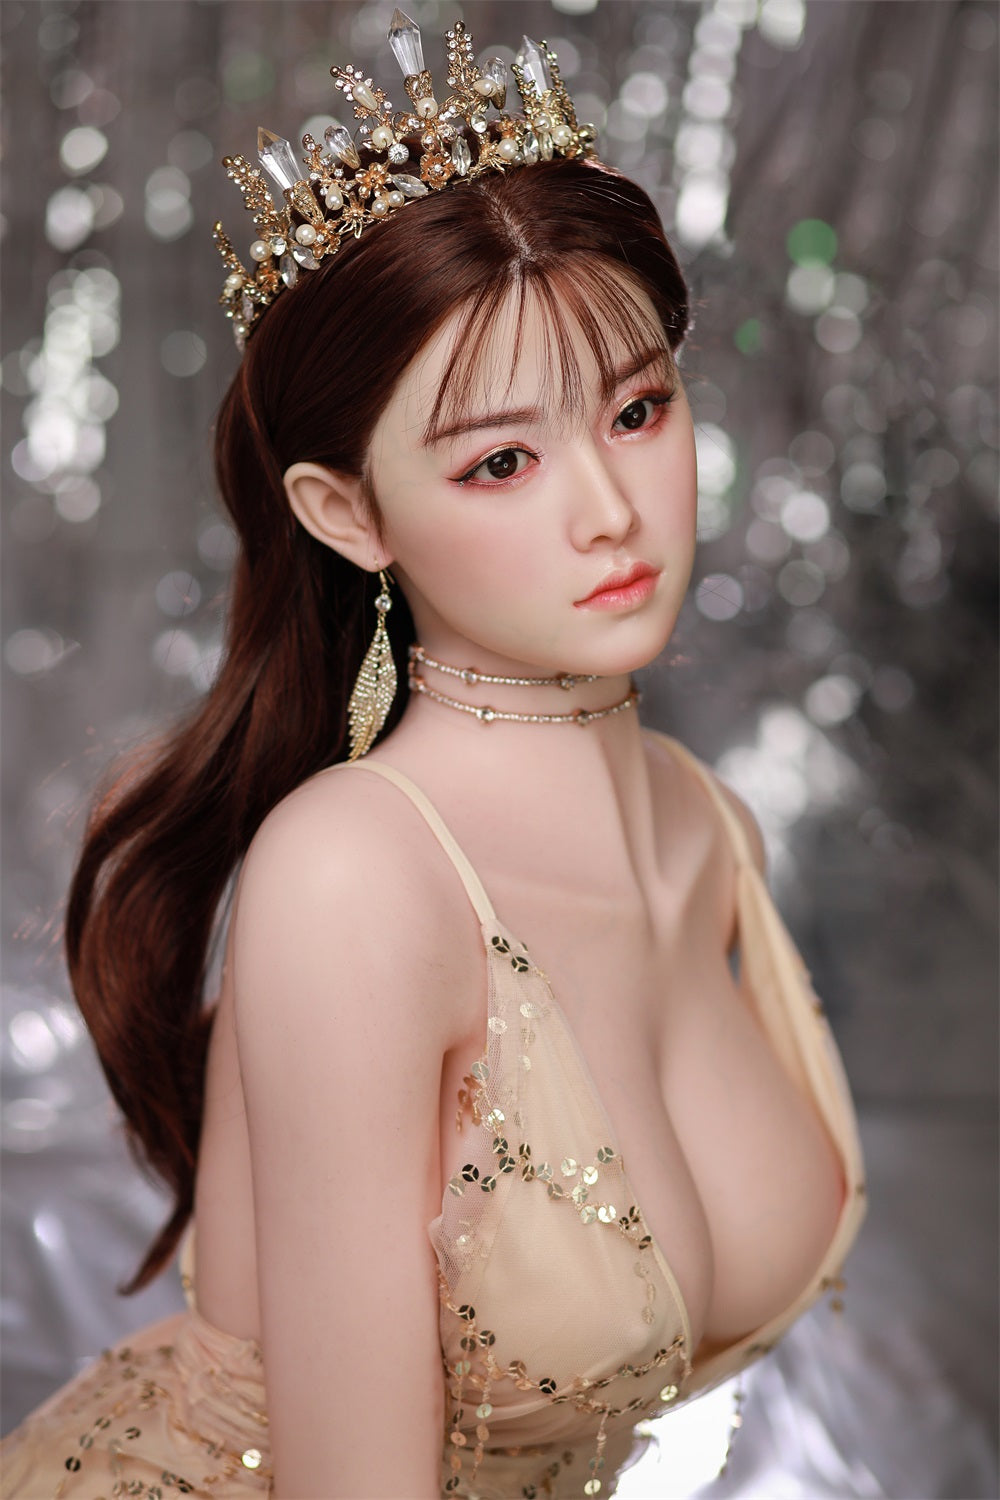 170cm cool and beautiful sex doll C cup silicone COSDoll